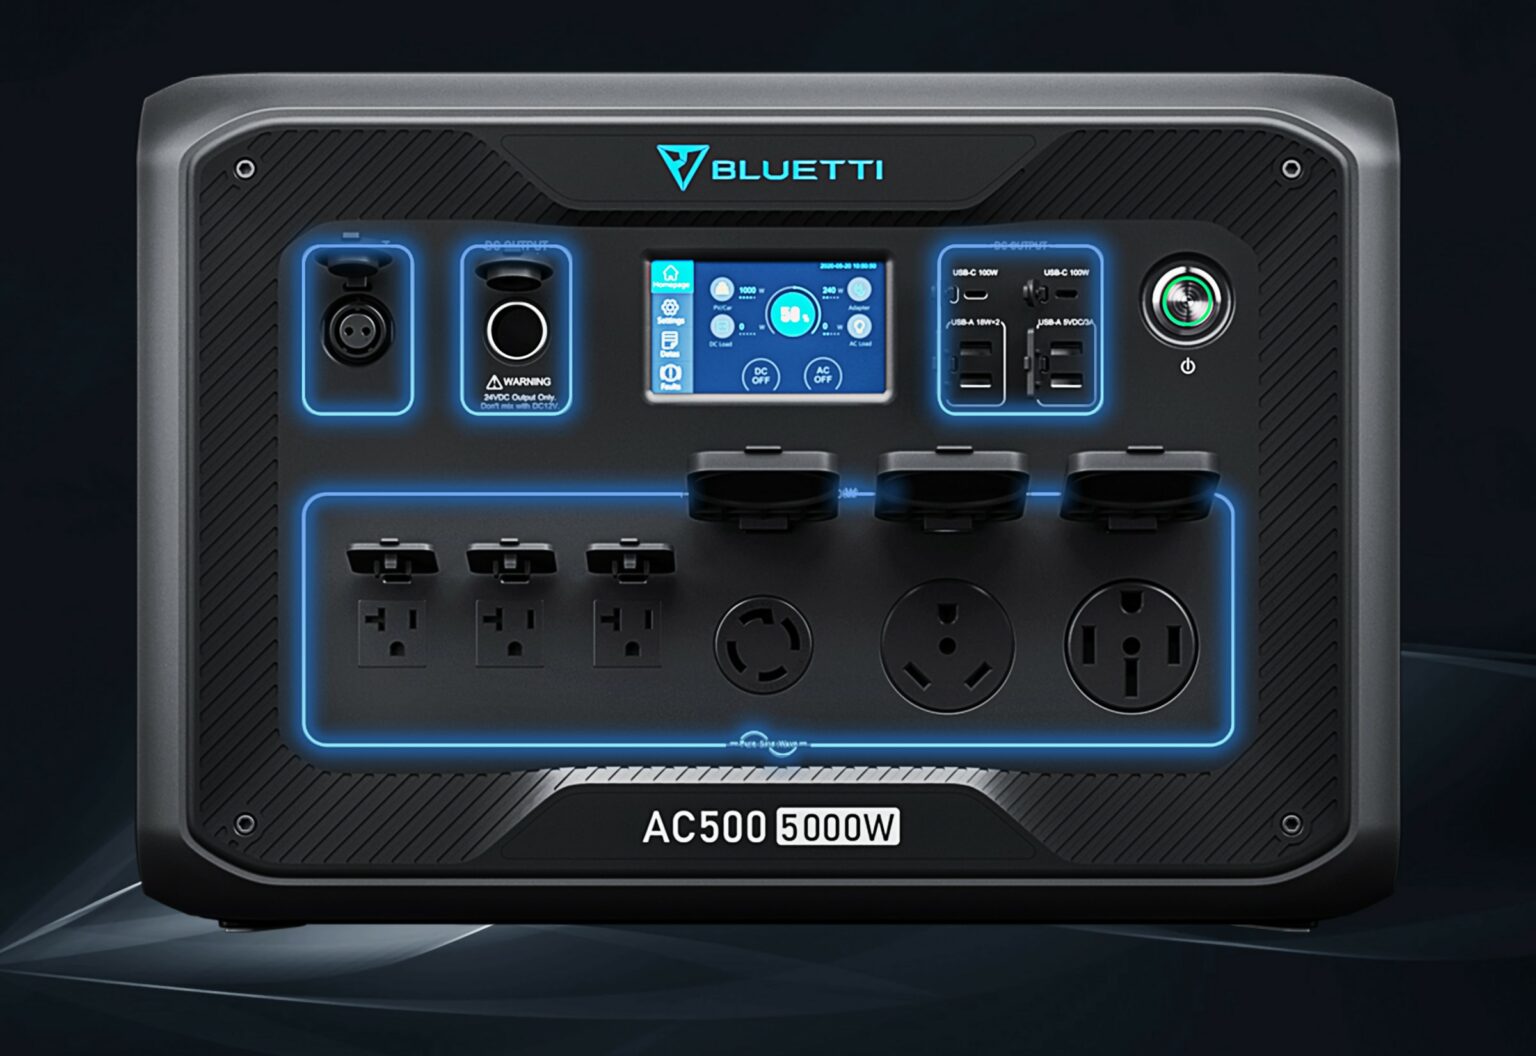 The Bluetti AC500 delivers power however you need it, thanks to 16 versatile output ports.